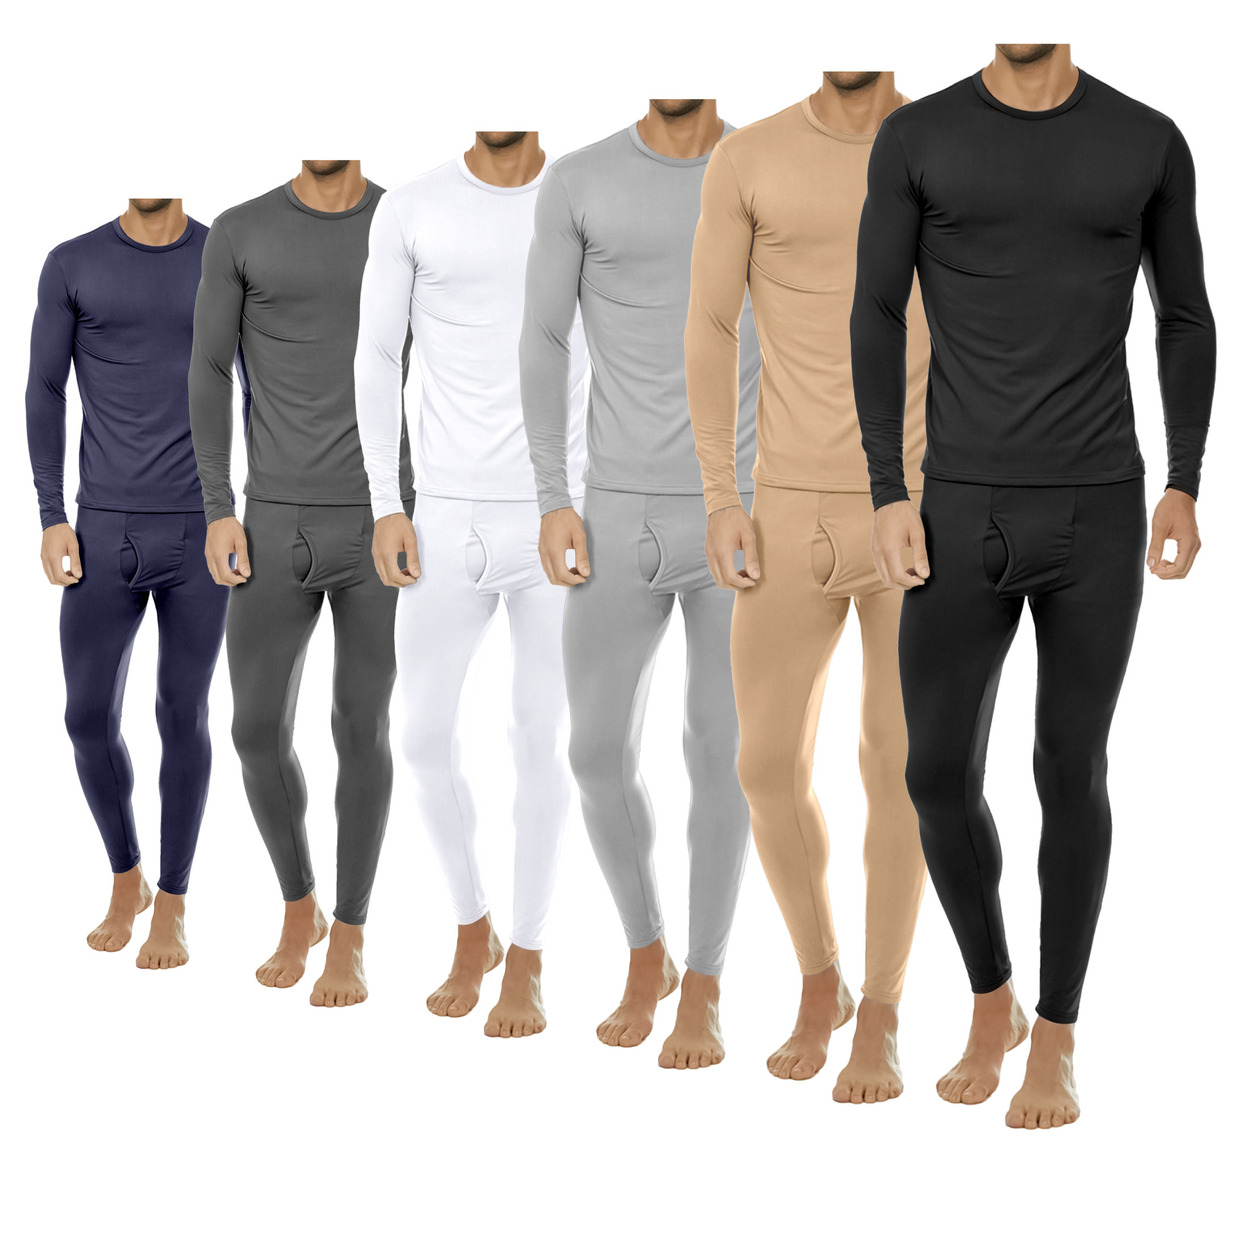 2-Pieces: Men's Winter Warm Fleece Lined Thermal Underwear Set For Cold Weather - Black, Small